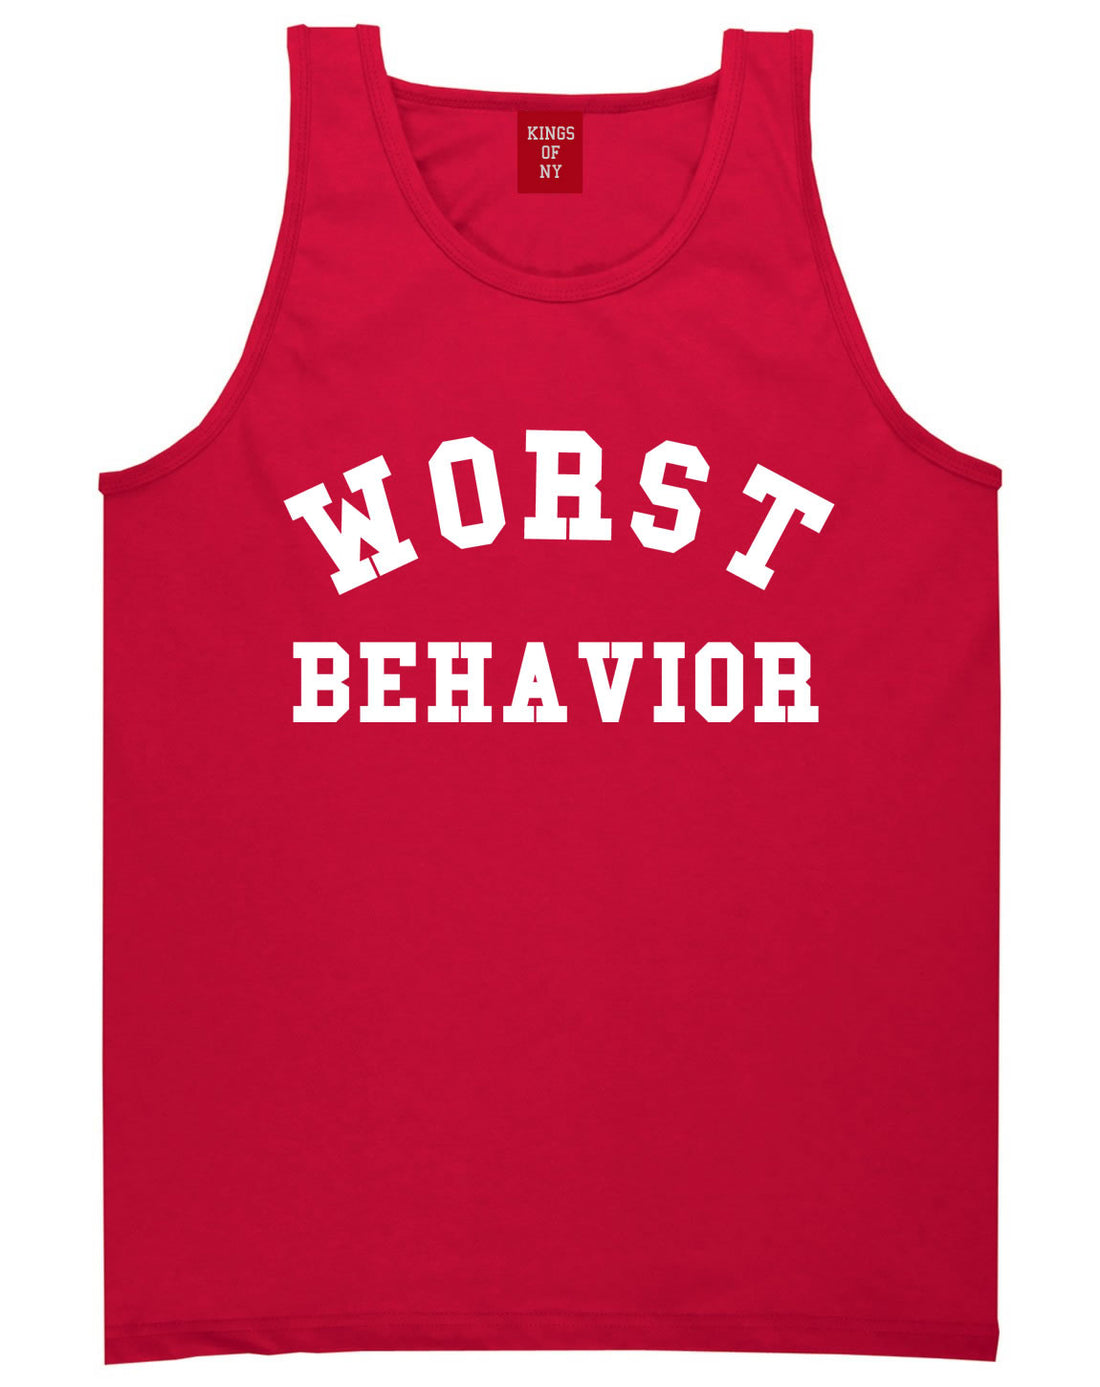 Worst Behavior Tank Top in Red by Kings Of NY